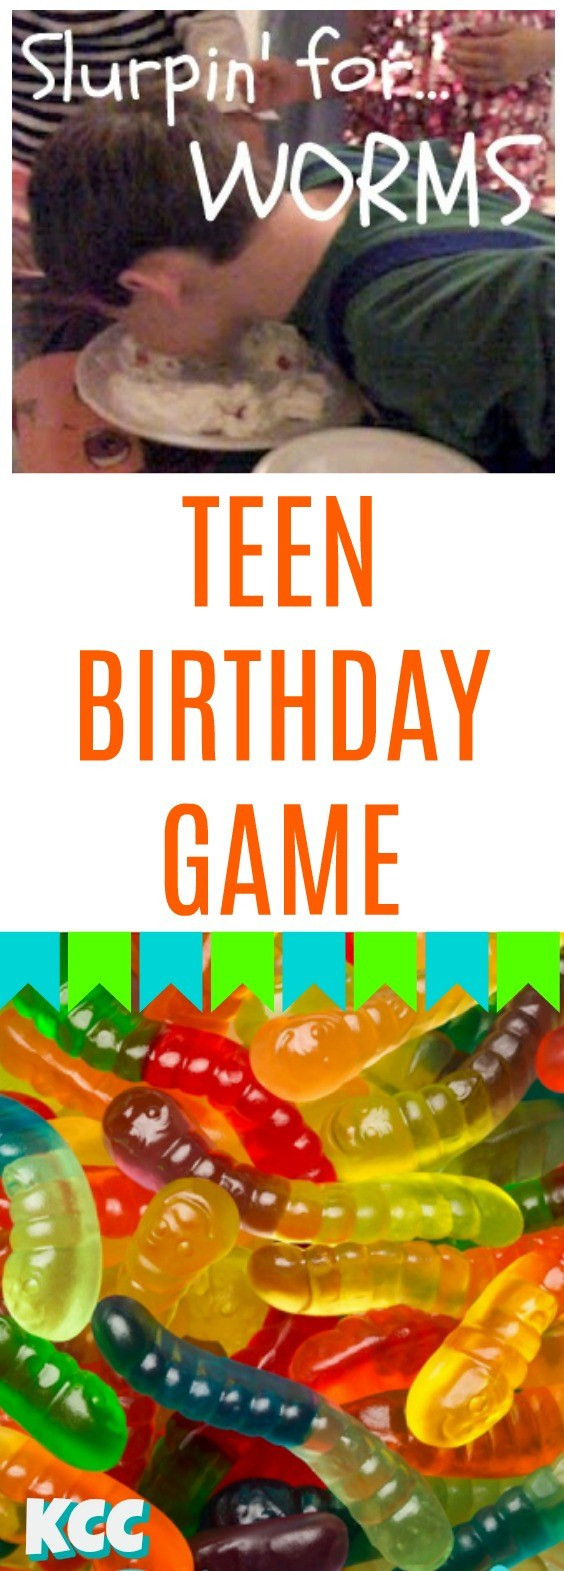 Halloween Party Game Ideas For Teenagers
 Over 15 Super Fun Halloween Party Game Ideas for Kids and